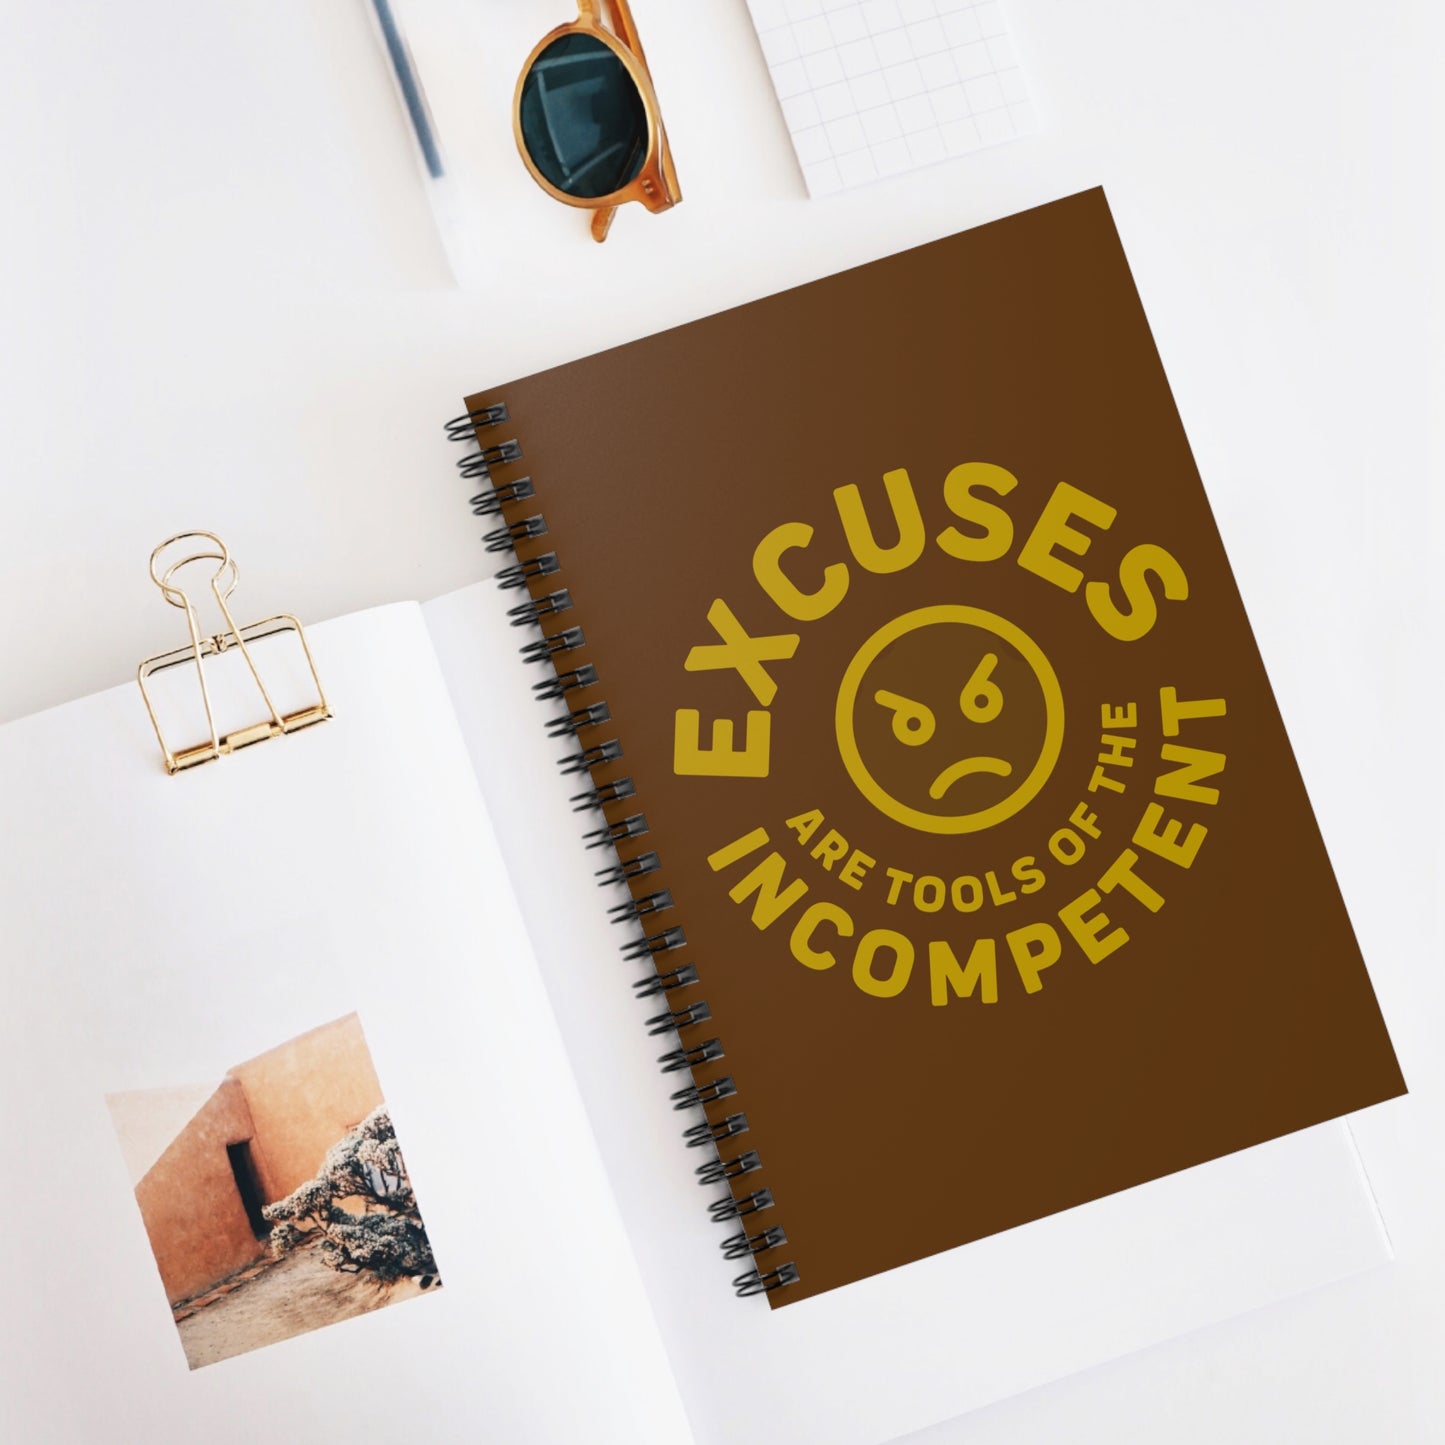 Excuses Notebook - Gold on Brown